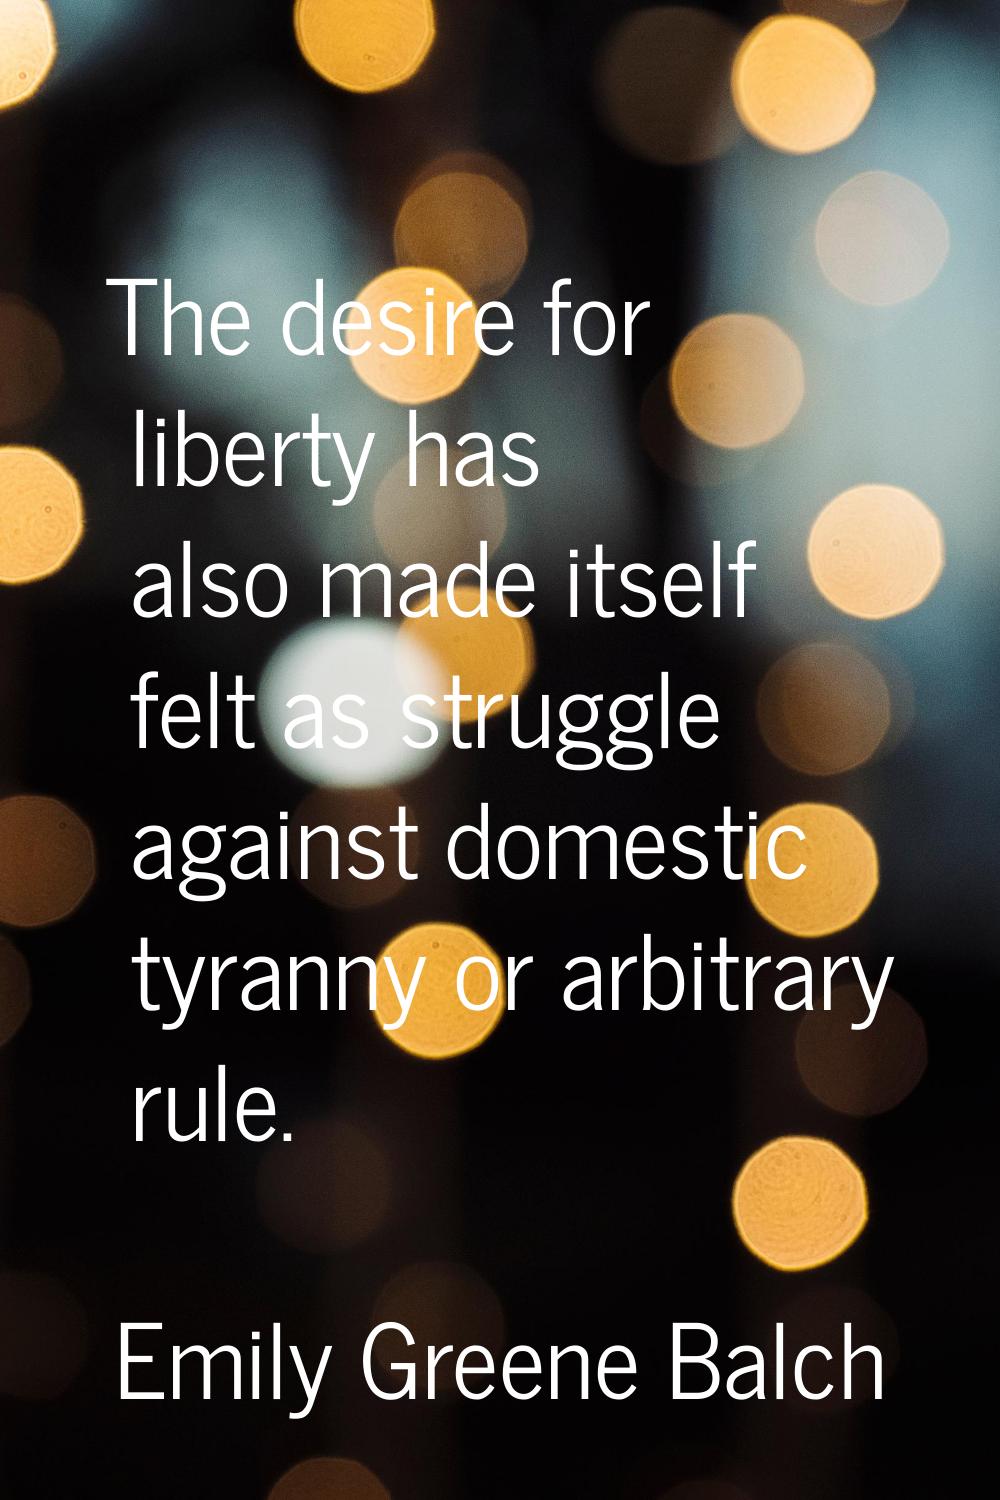 The desire for liberty has also made itself felt as struggle against domestic tyranny or arbitrary 